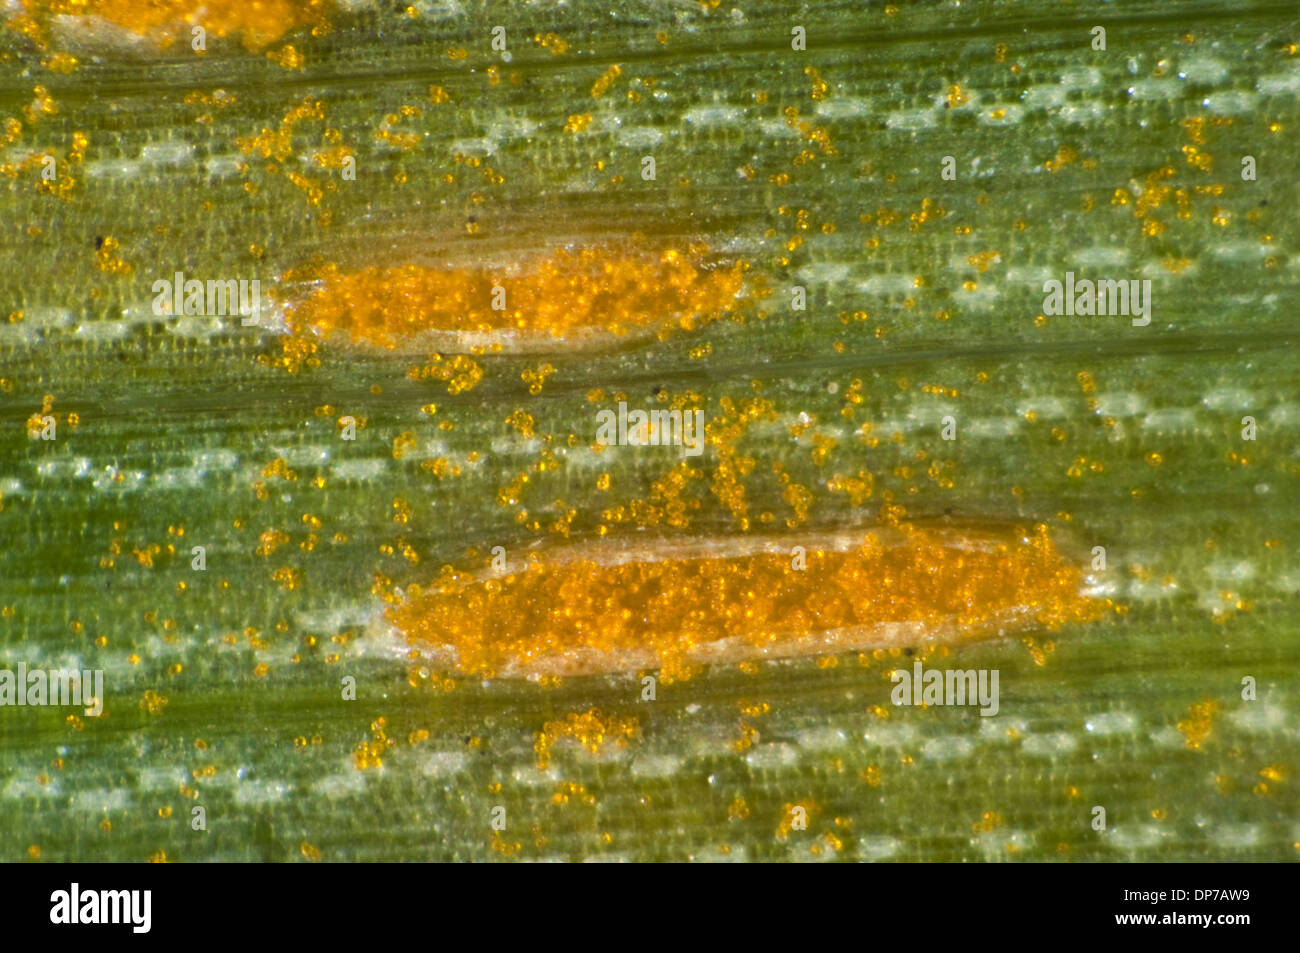 A photomicrograph of oat crown rust, Puccinia coronata, pustules on an oats leaf Stock Photo